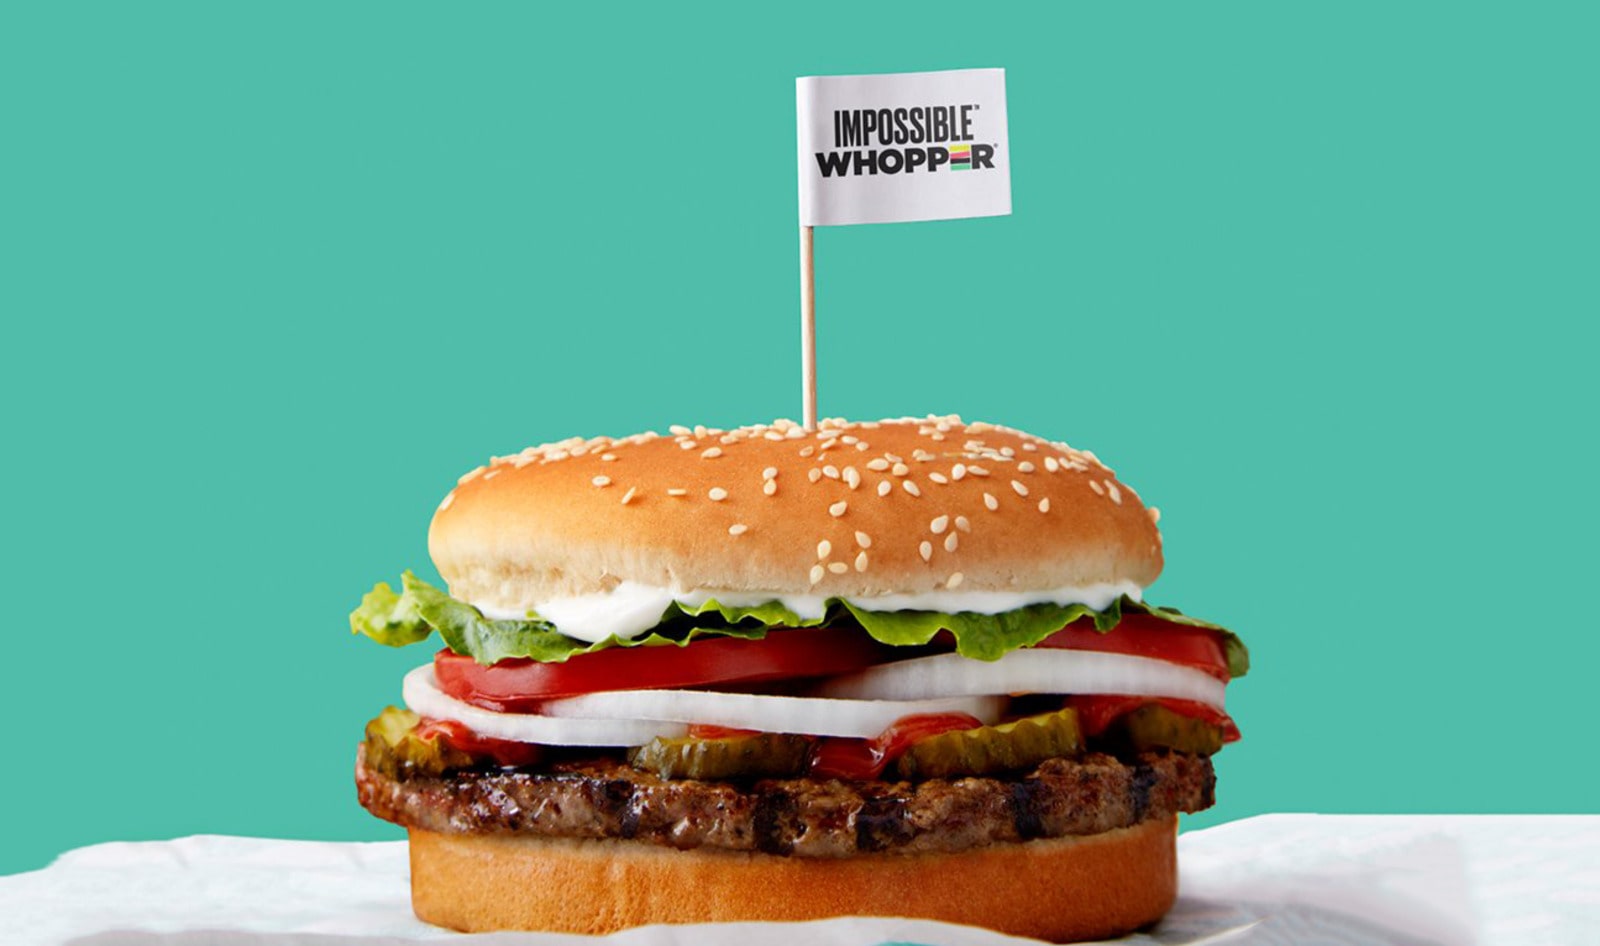 Fast-Food Chains Sold 228 Million Plant-Based Burgers in 2019